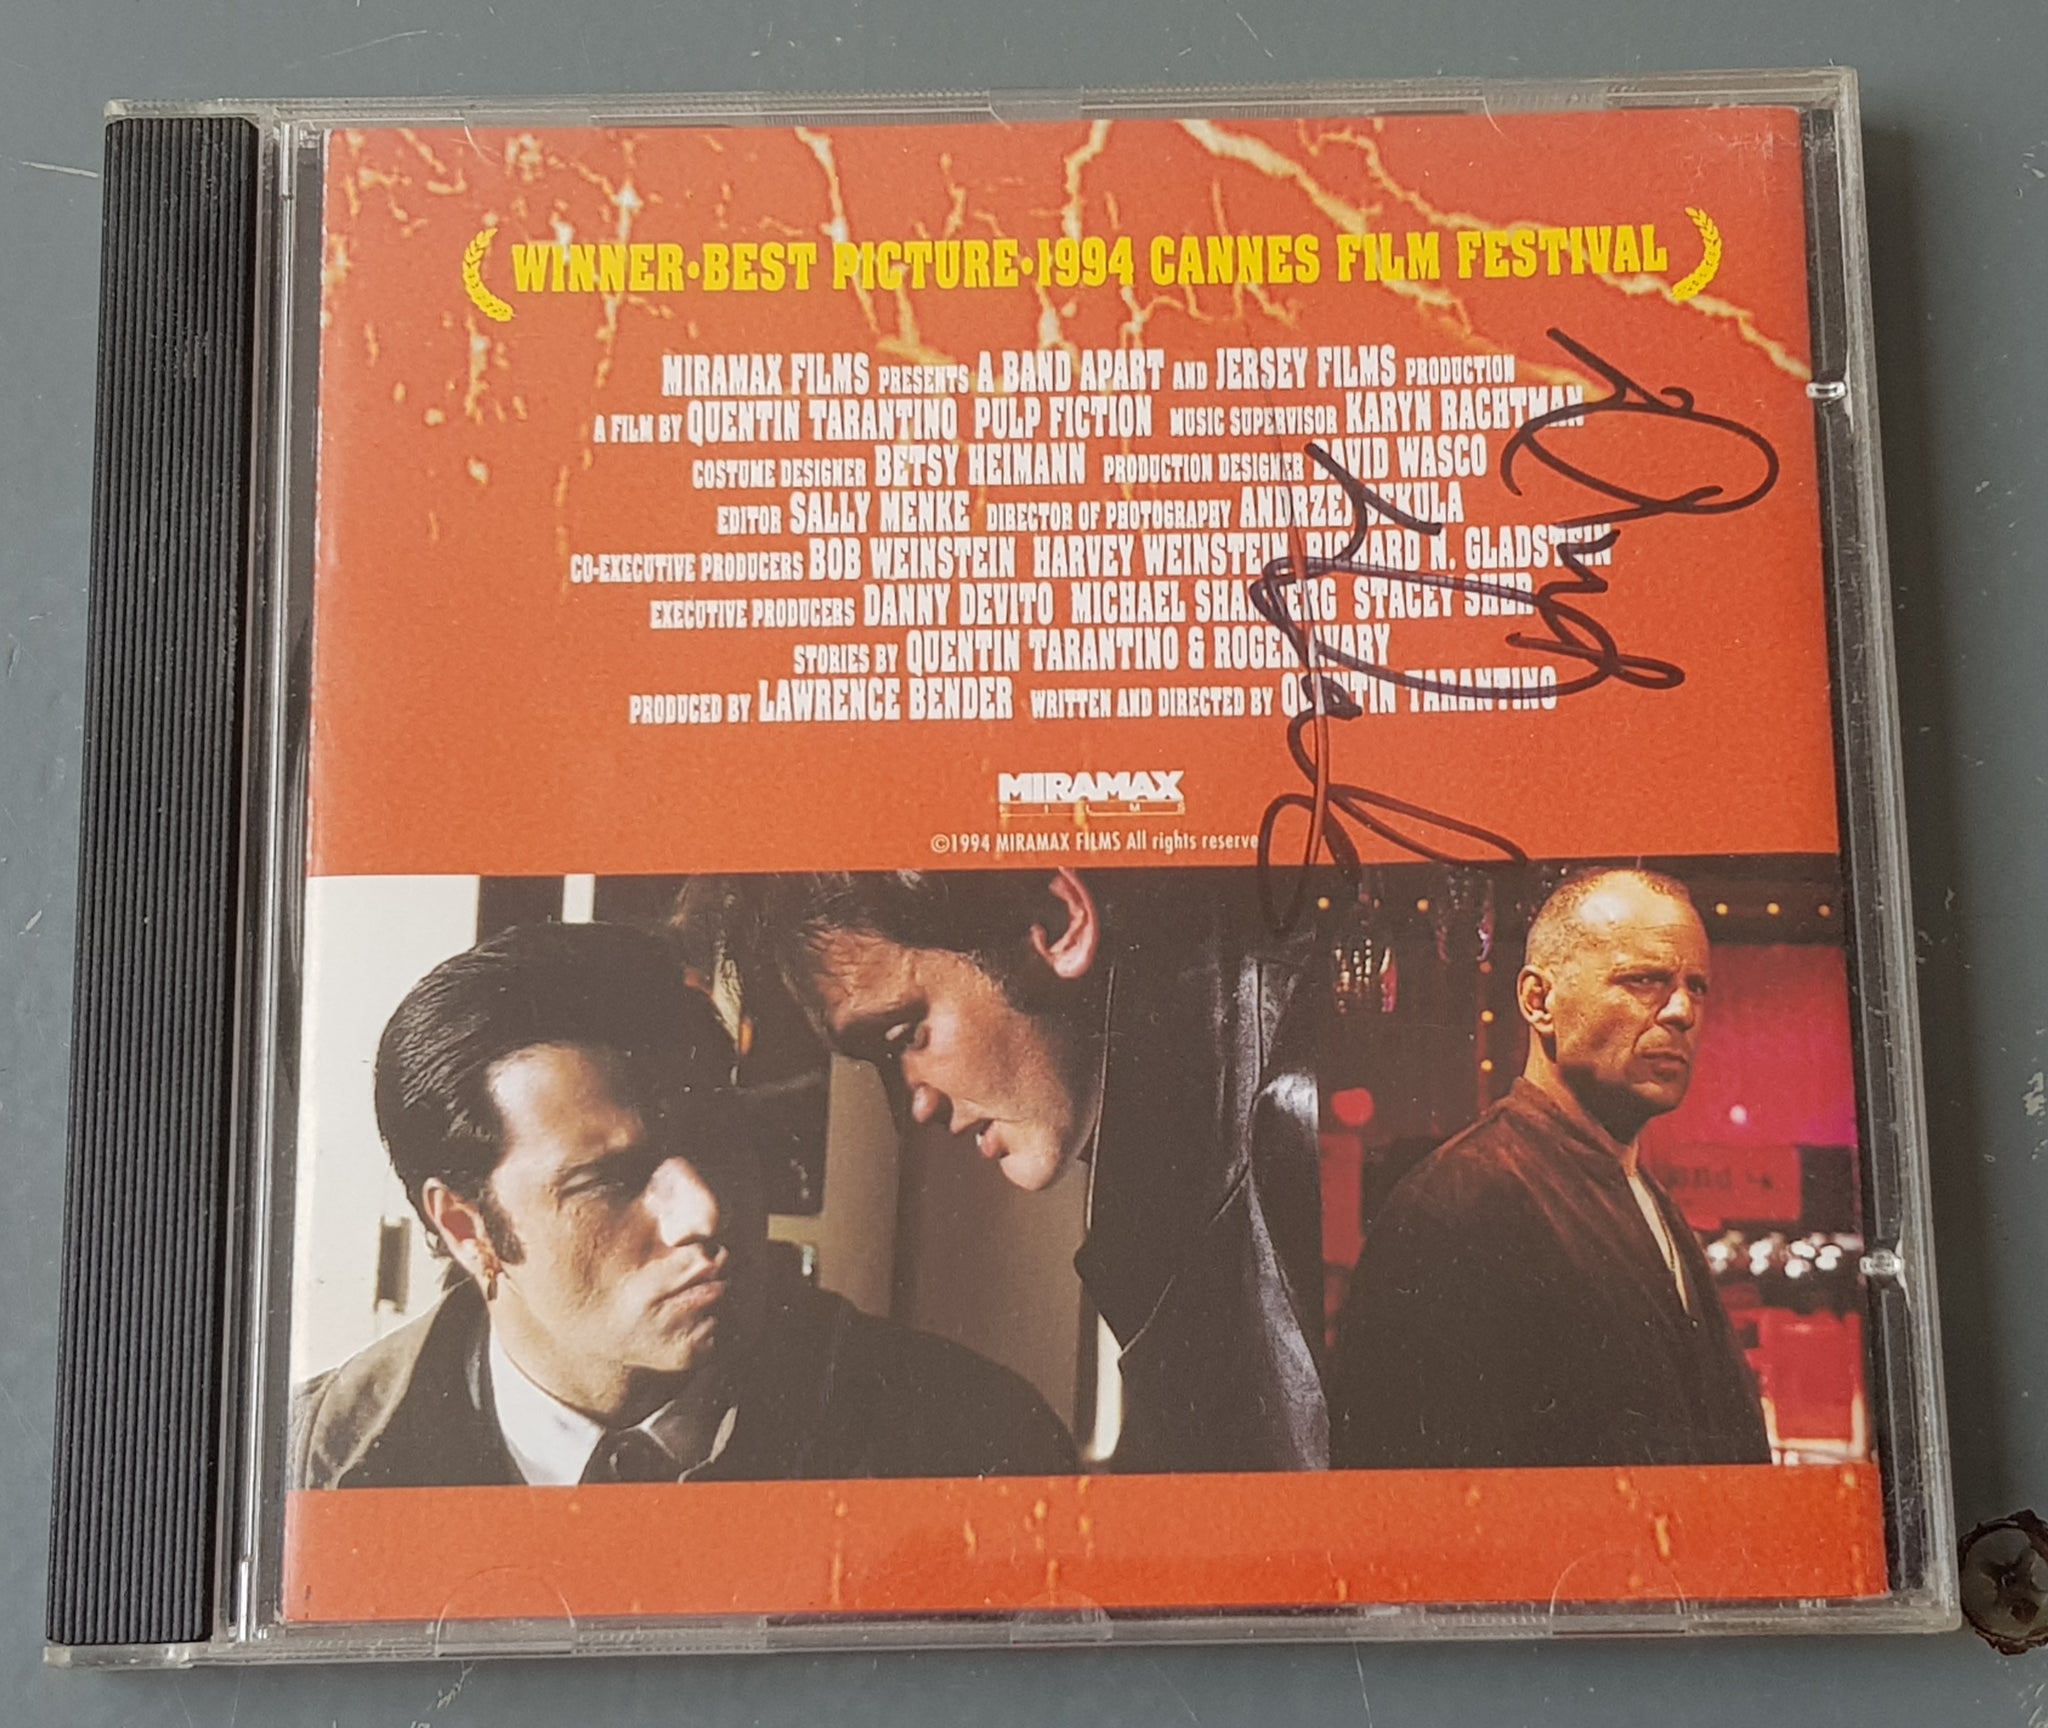 Pulp Fiction - Music from the Motion Picture CD (Signed by Dick Dale)